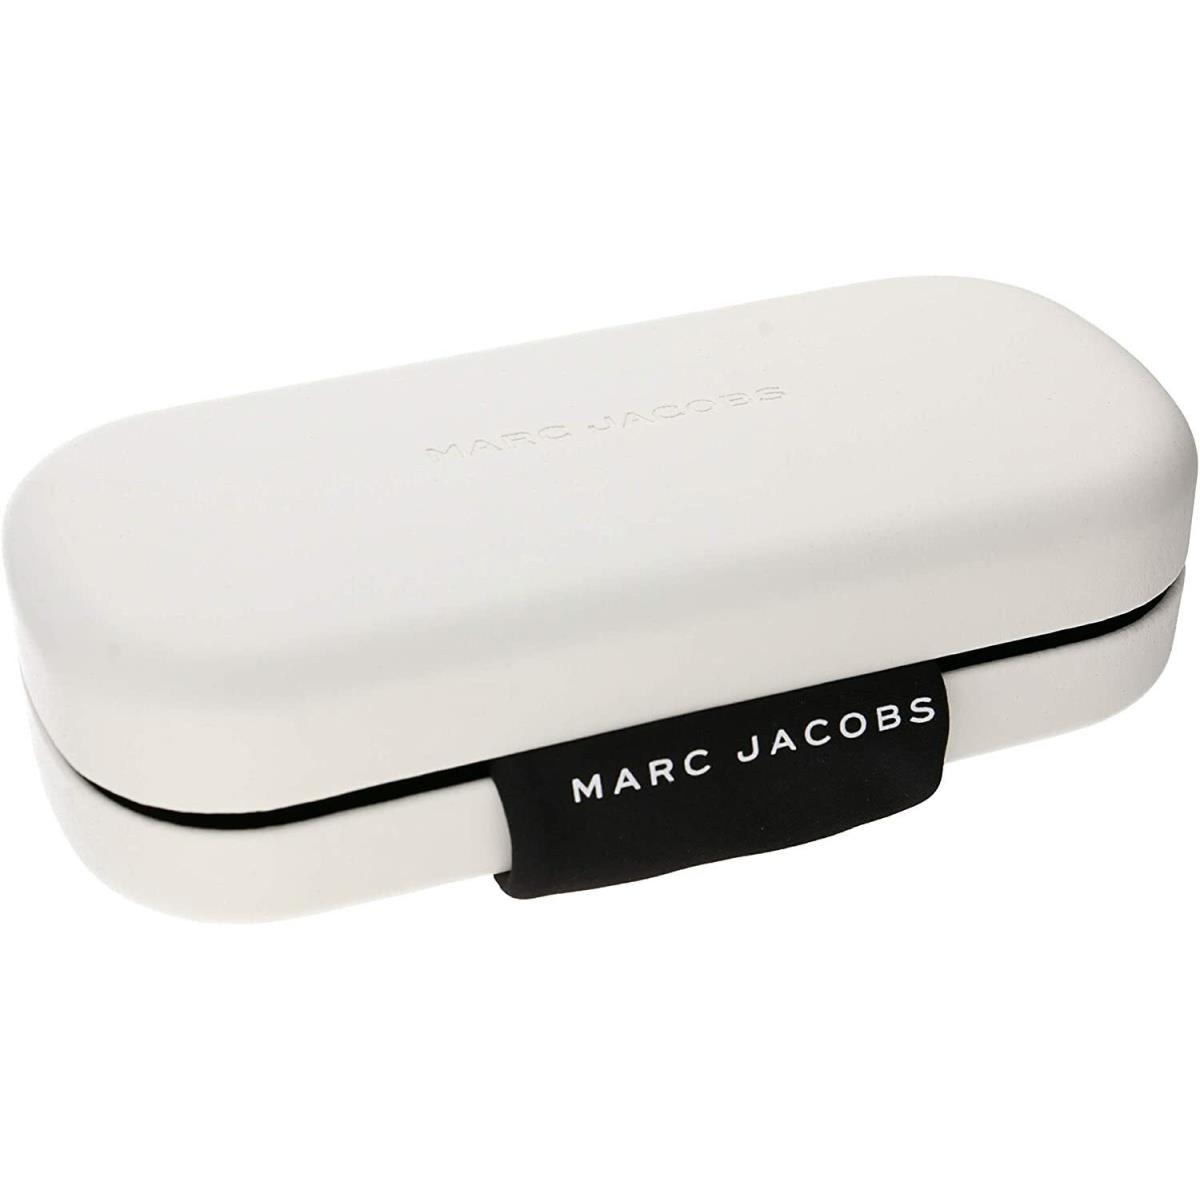 Marc Jacobs Sunglass Hard Cases Cleaning Cloths. Lot OF 86. $7/case